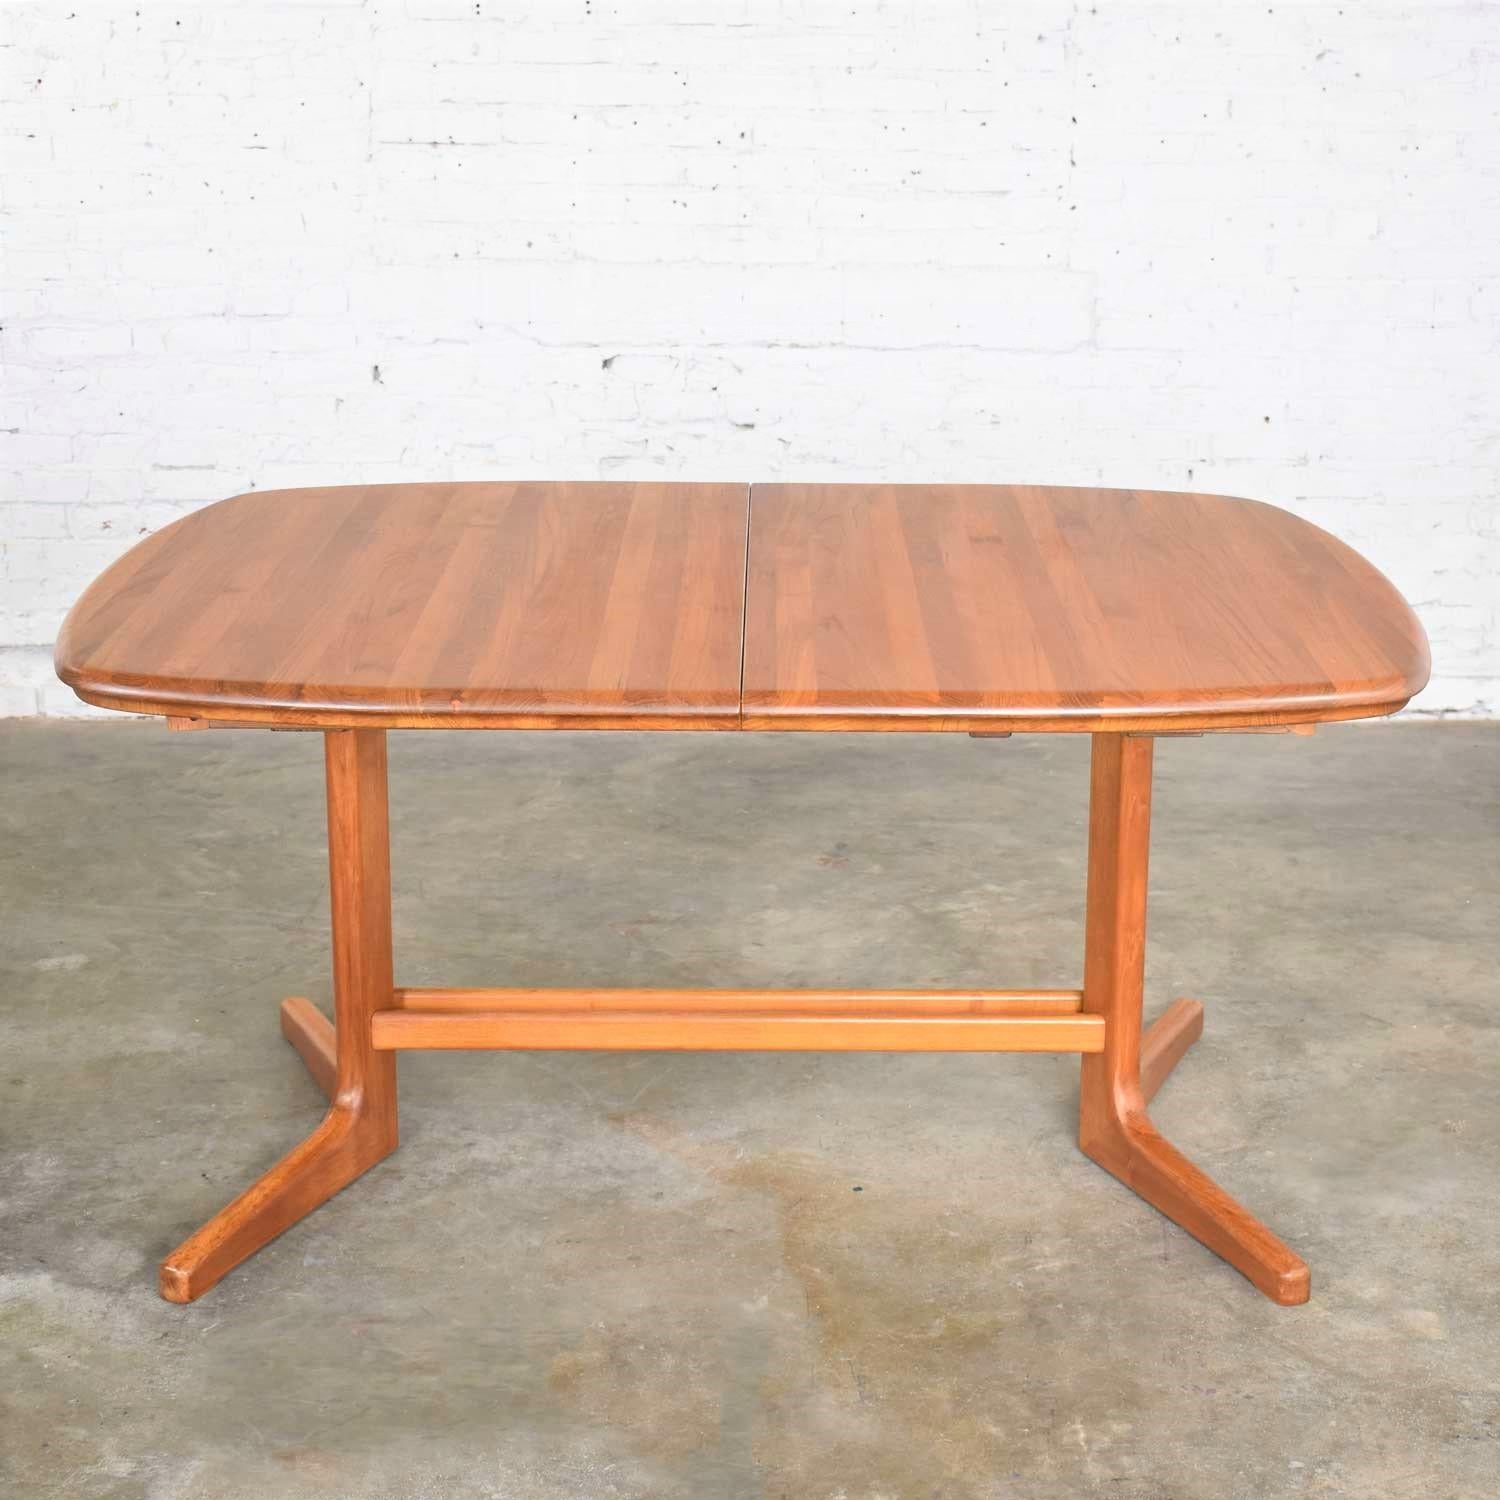 Danish Scandinavian Modern Teak Oval Expanding Dining Table Attributed to Dyrlund